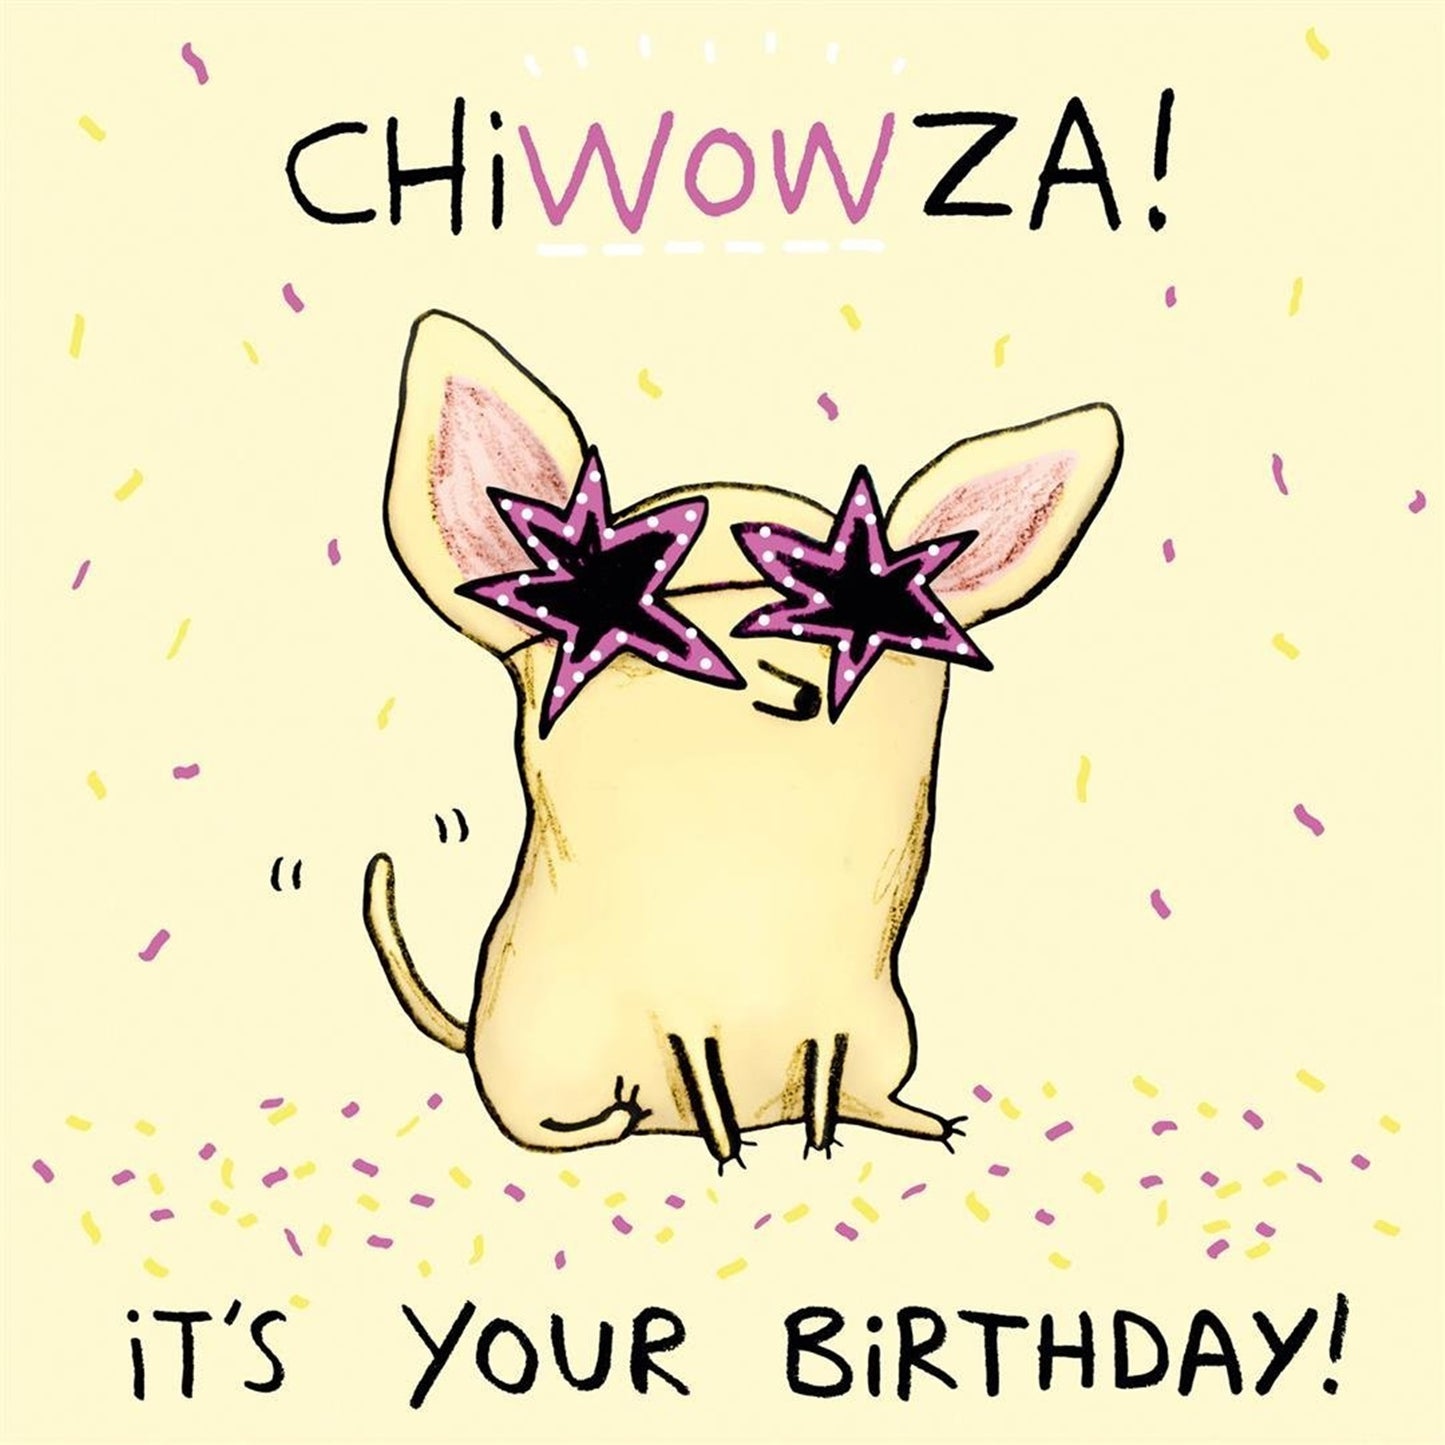 Paper Trail Birthday Card - Chiwowza, It's Your Birthday!